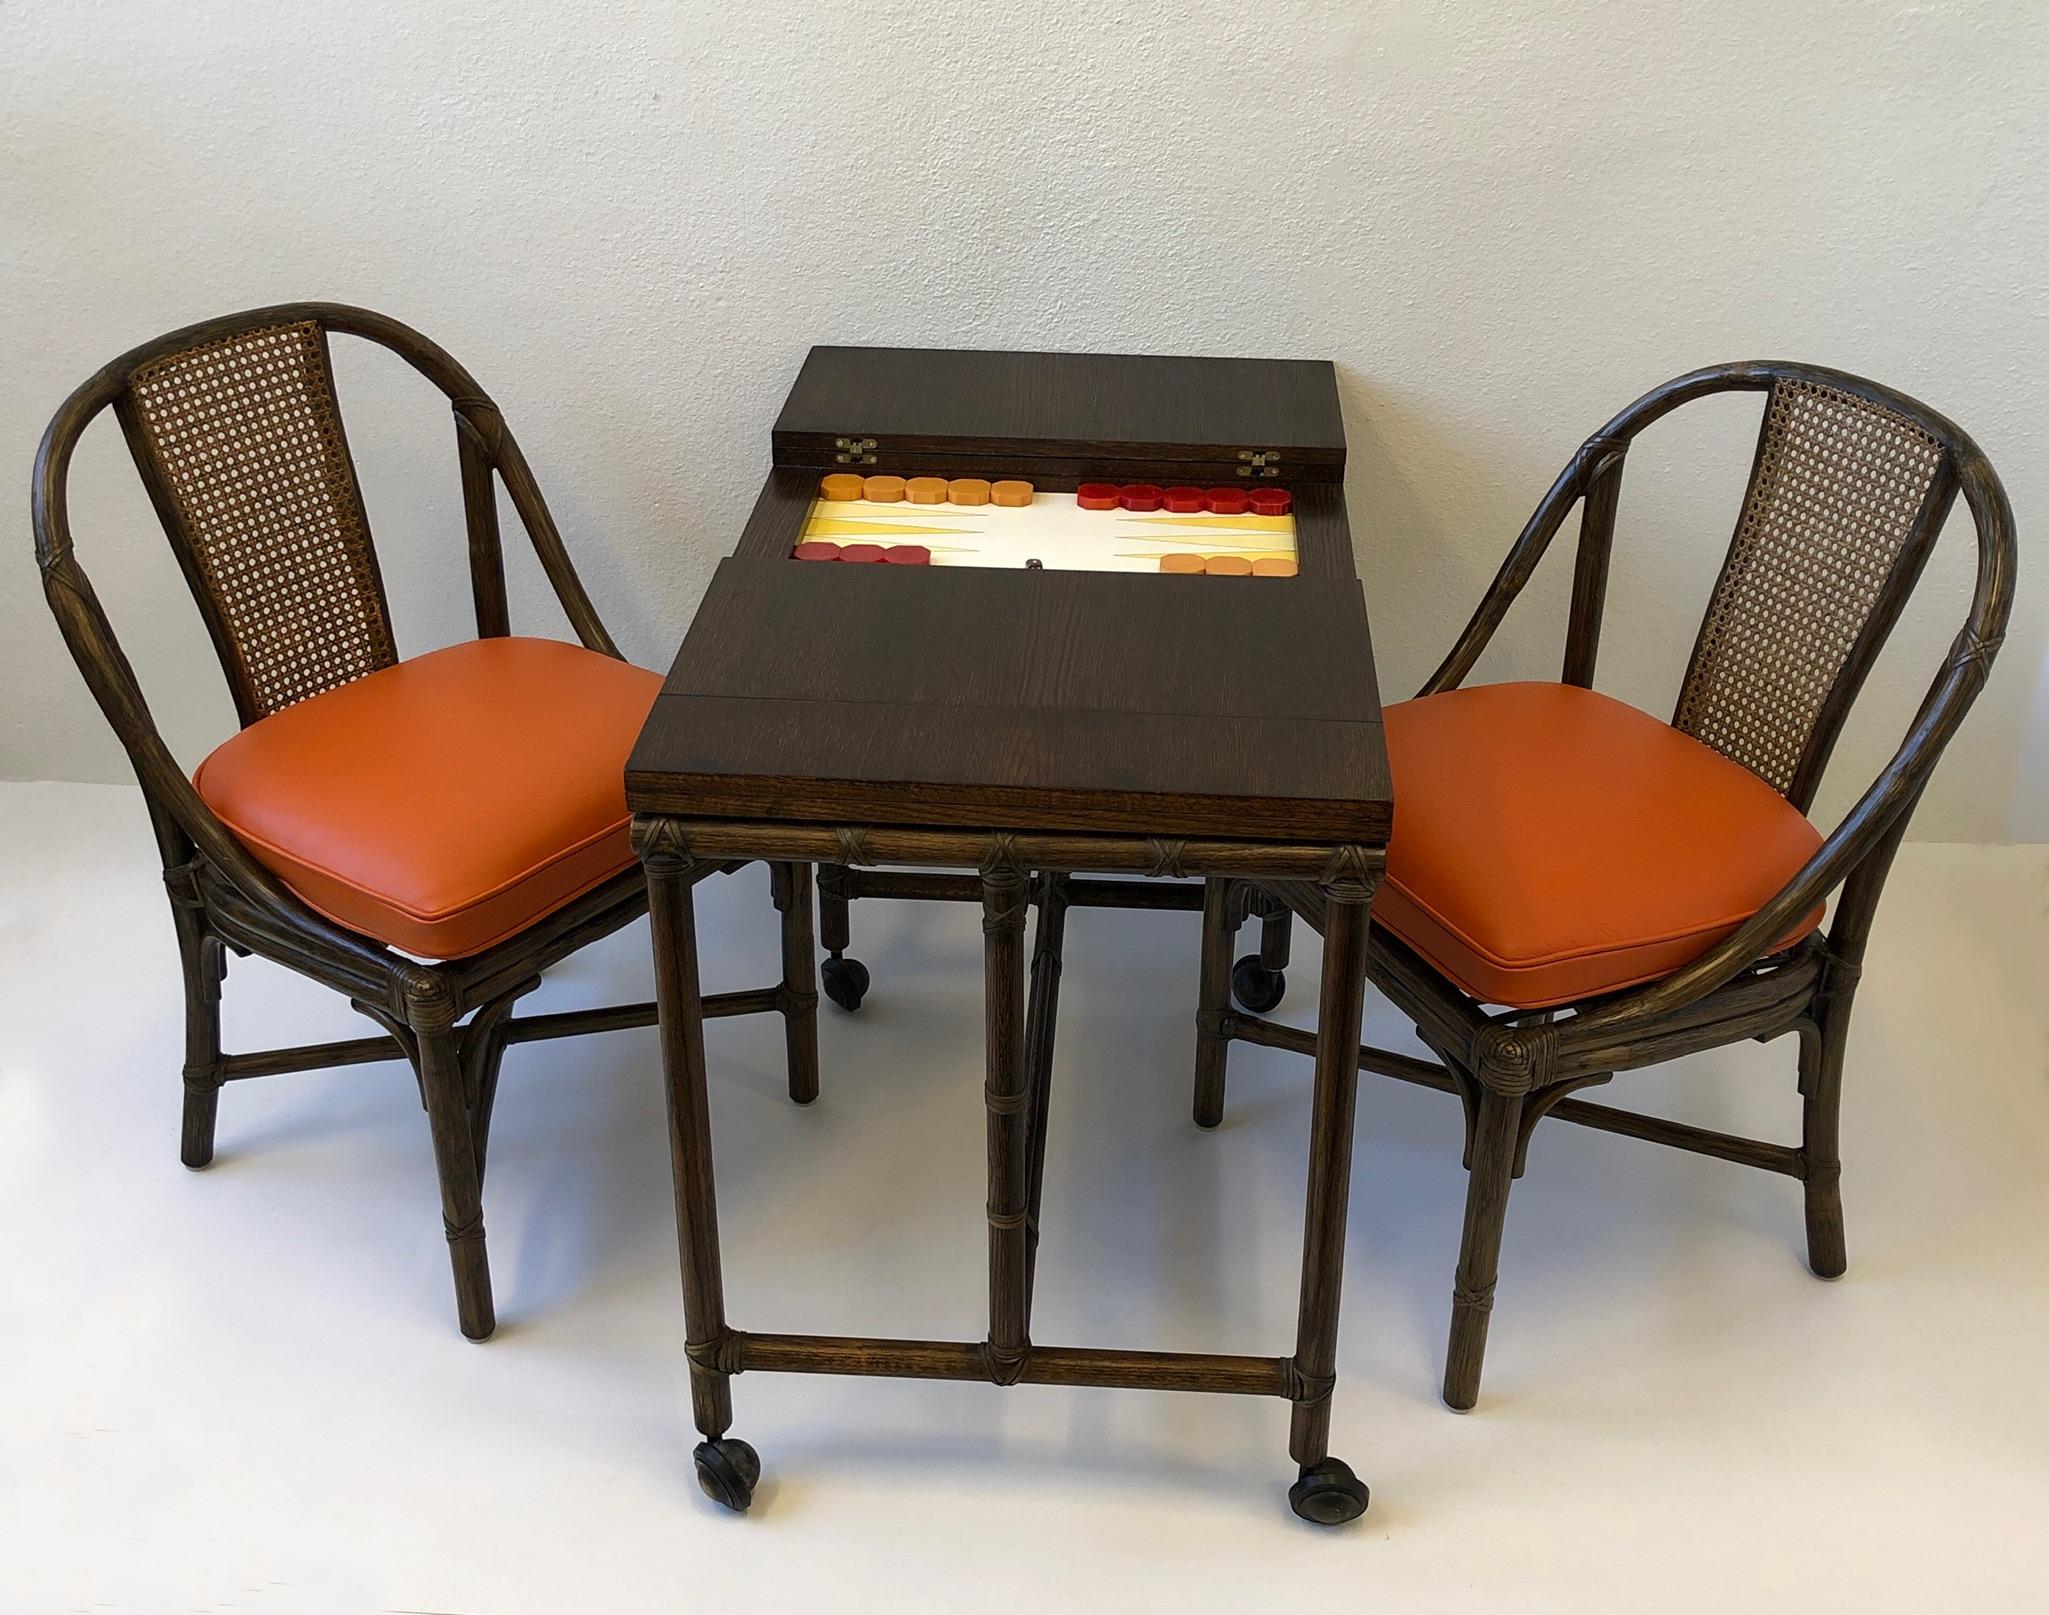 American Bamboo and Oak Backgammon Game Table and Chairs by McGuire